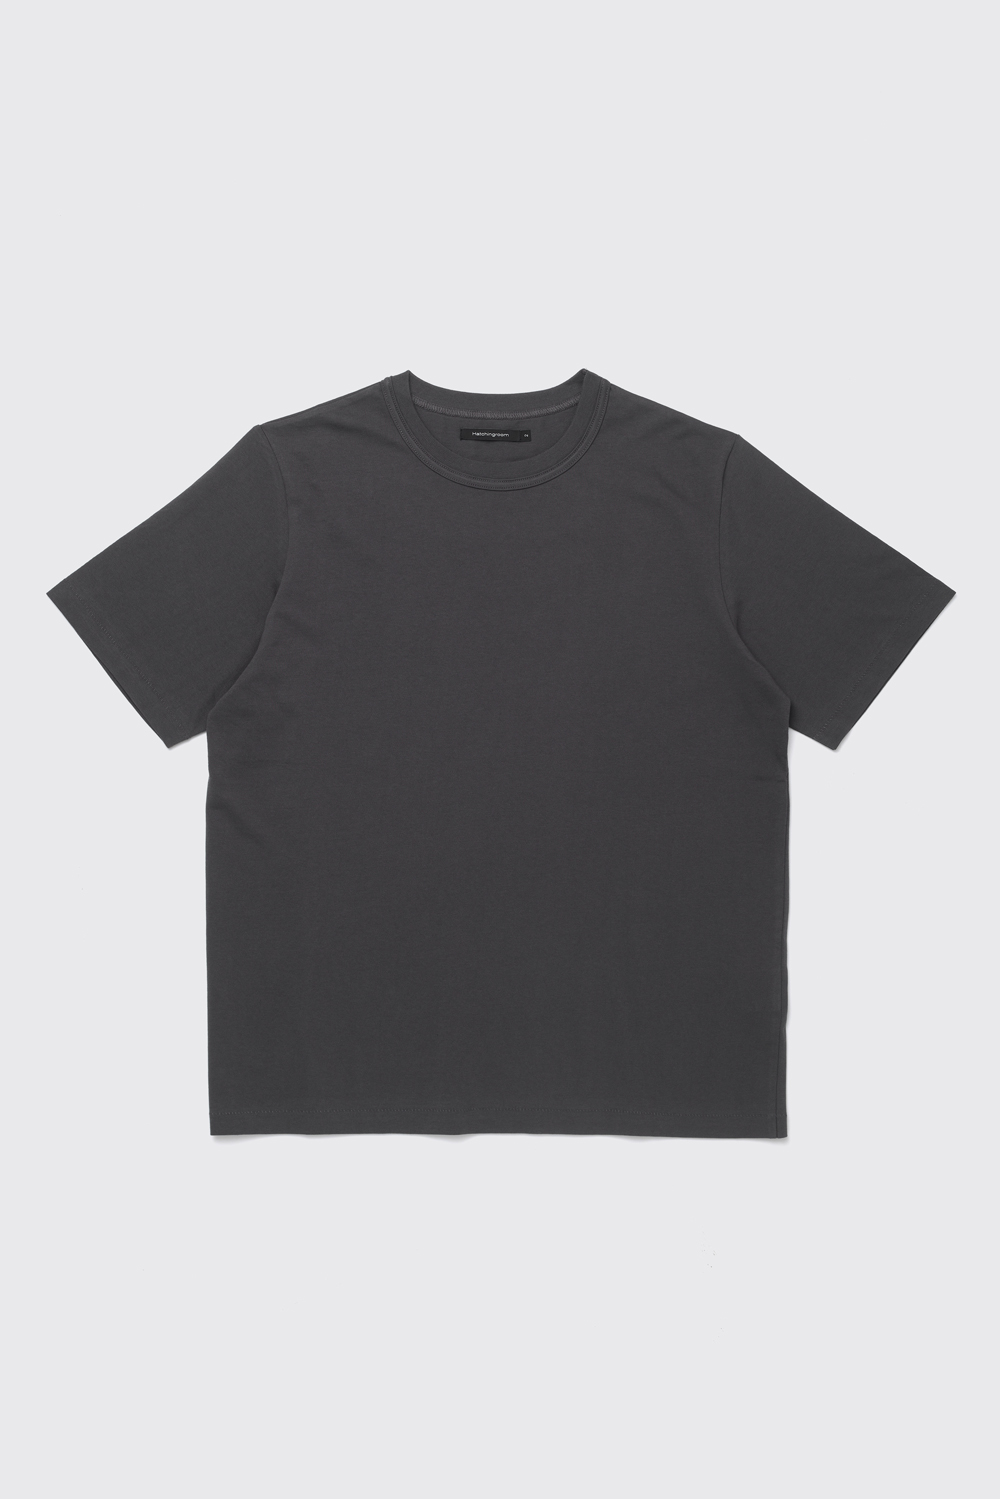 Solid Tee(Thin) Charcoal